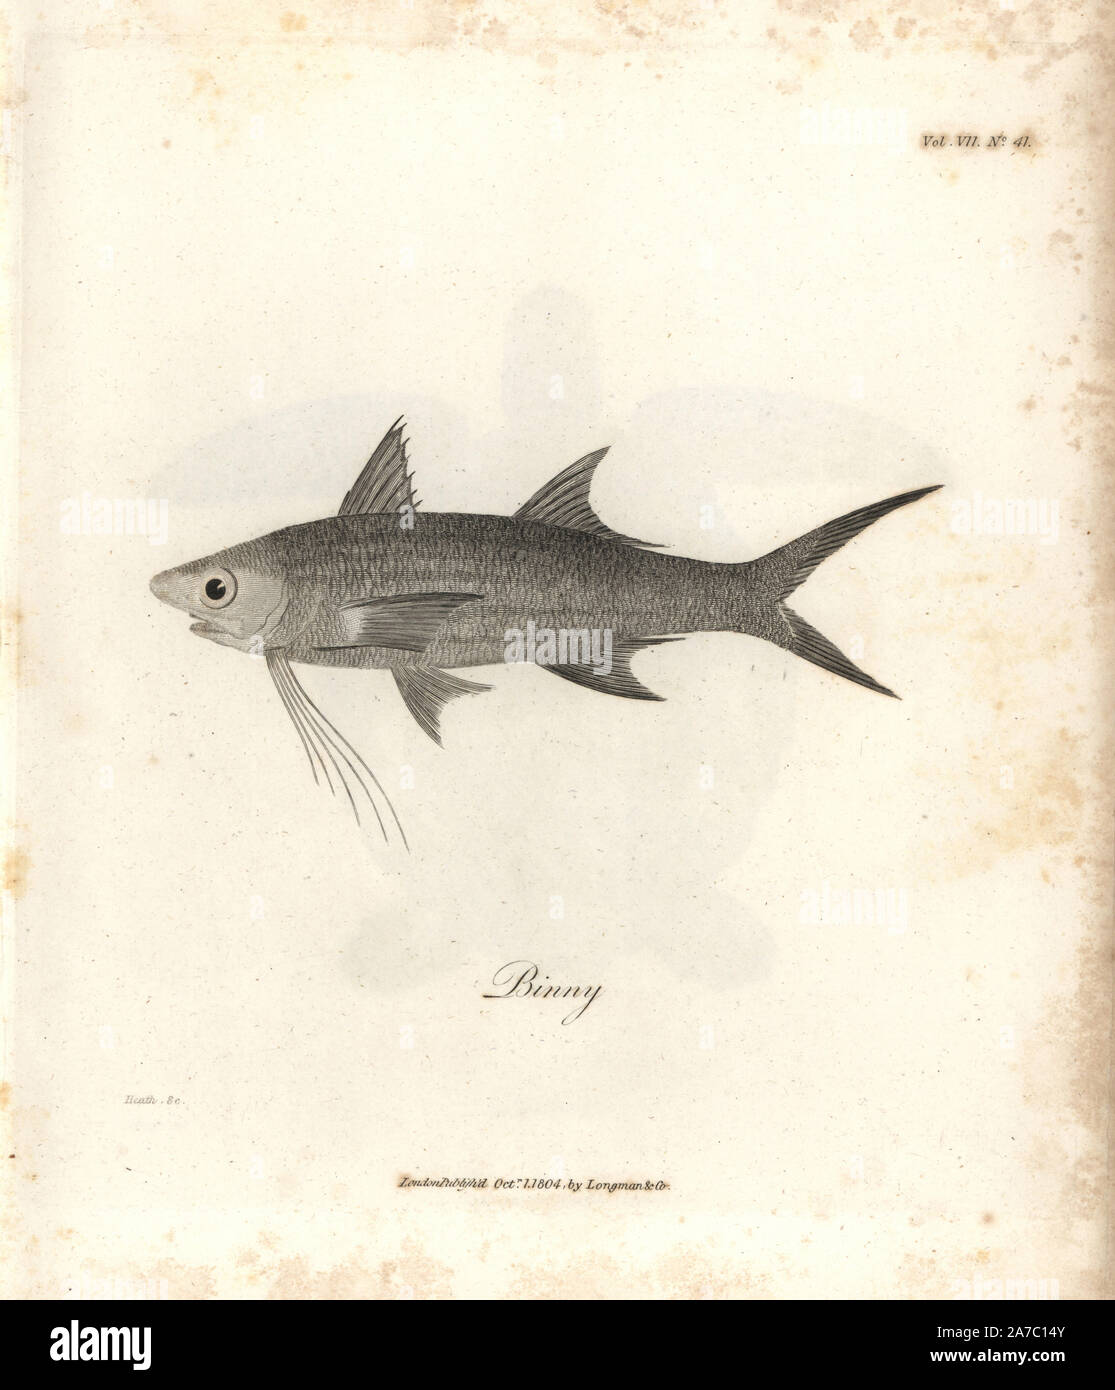 Nile binny fish, Barbus bynni. Copperplate engraving from James Bruce's 'Travels to Discover the Source of the Nile, in the years 1768, 1769, 1770, 1771, 1772 and 1773,' London, 1790. James Bruce (1730-1794) was a Scottish explorer and travel writer who spent more than 12 years in North Africa and Ethiopia. Engraved by Heath after an original drawing by Bruce. Stock Photo